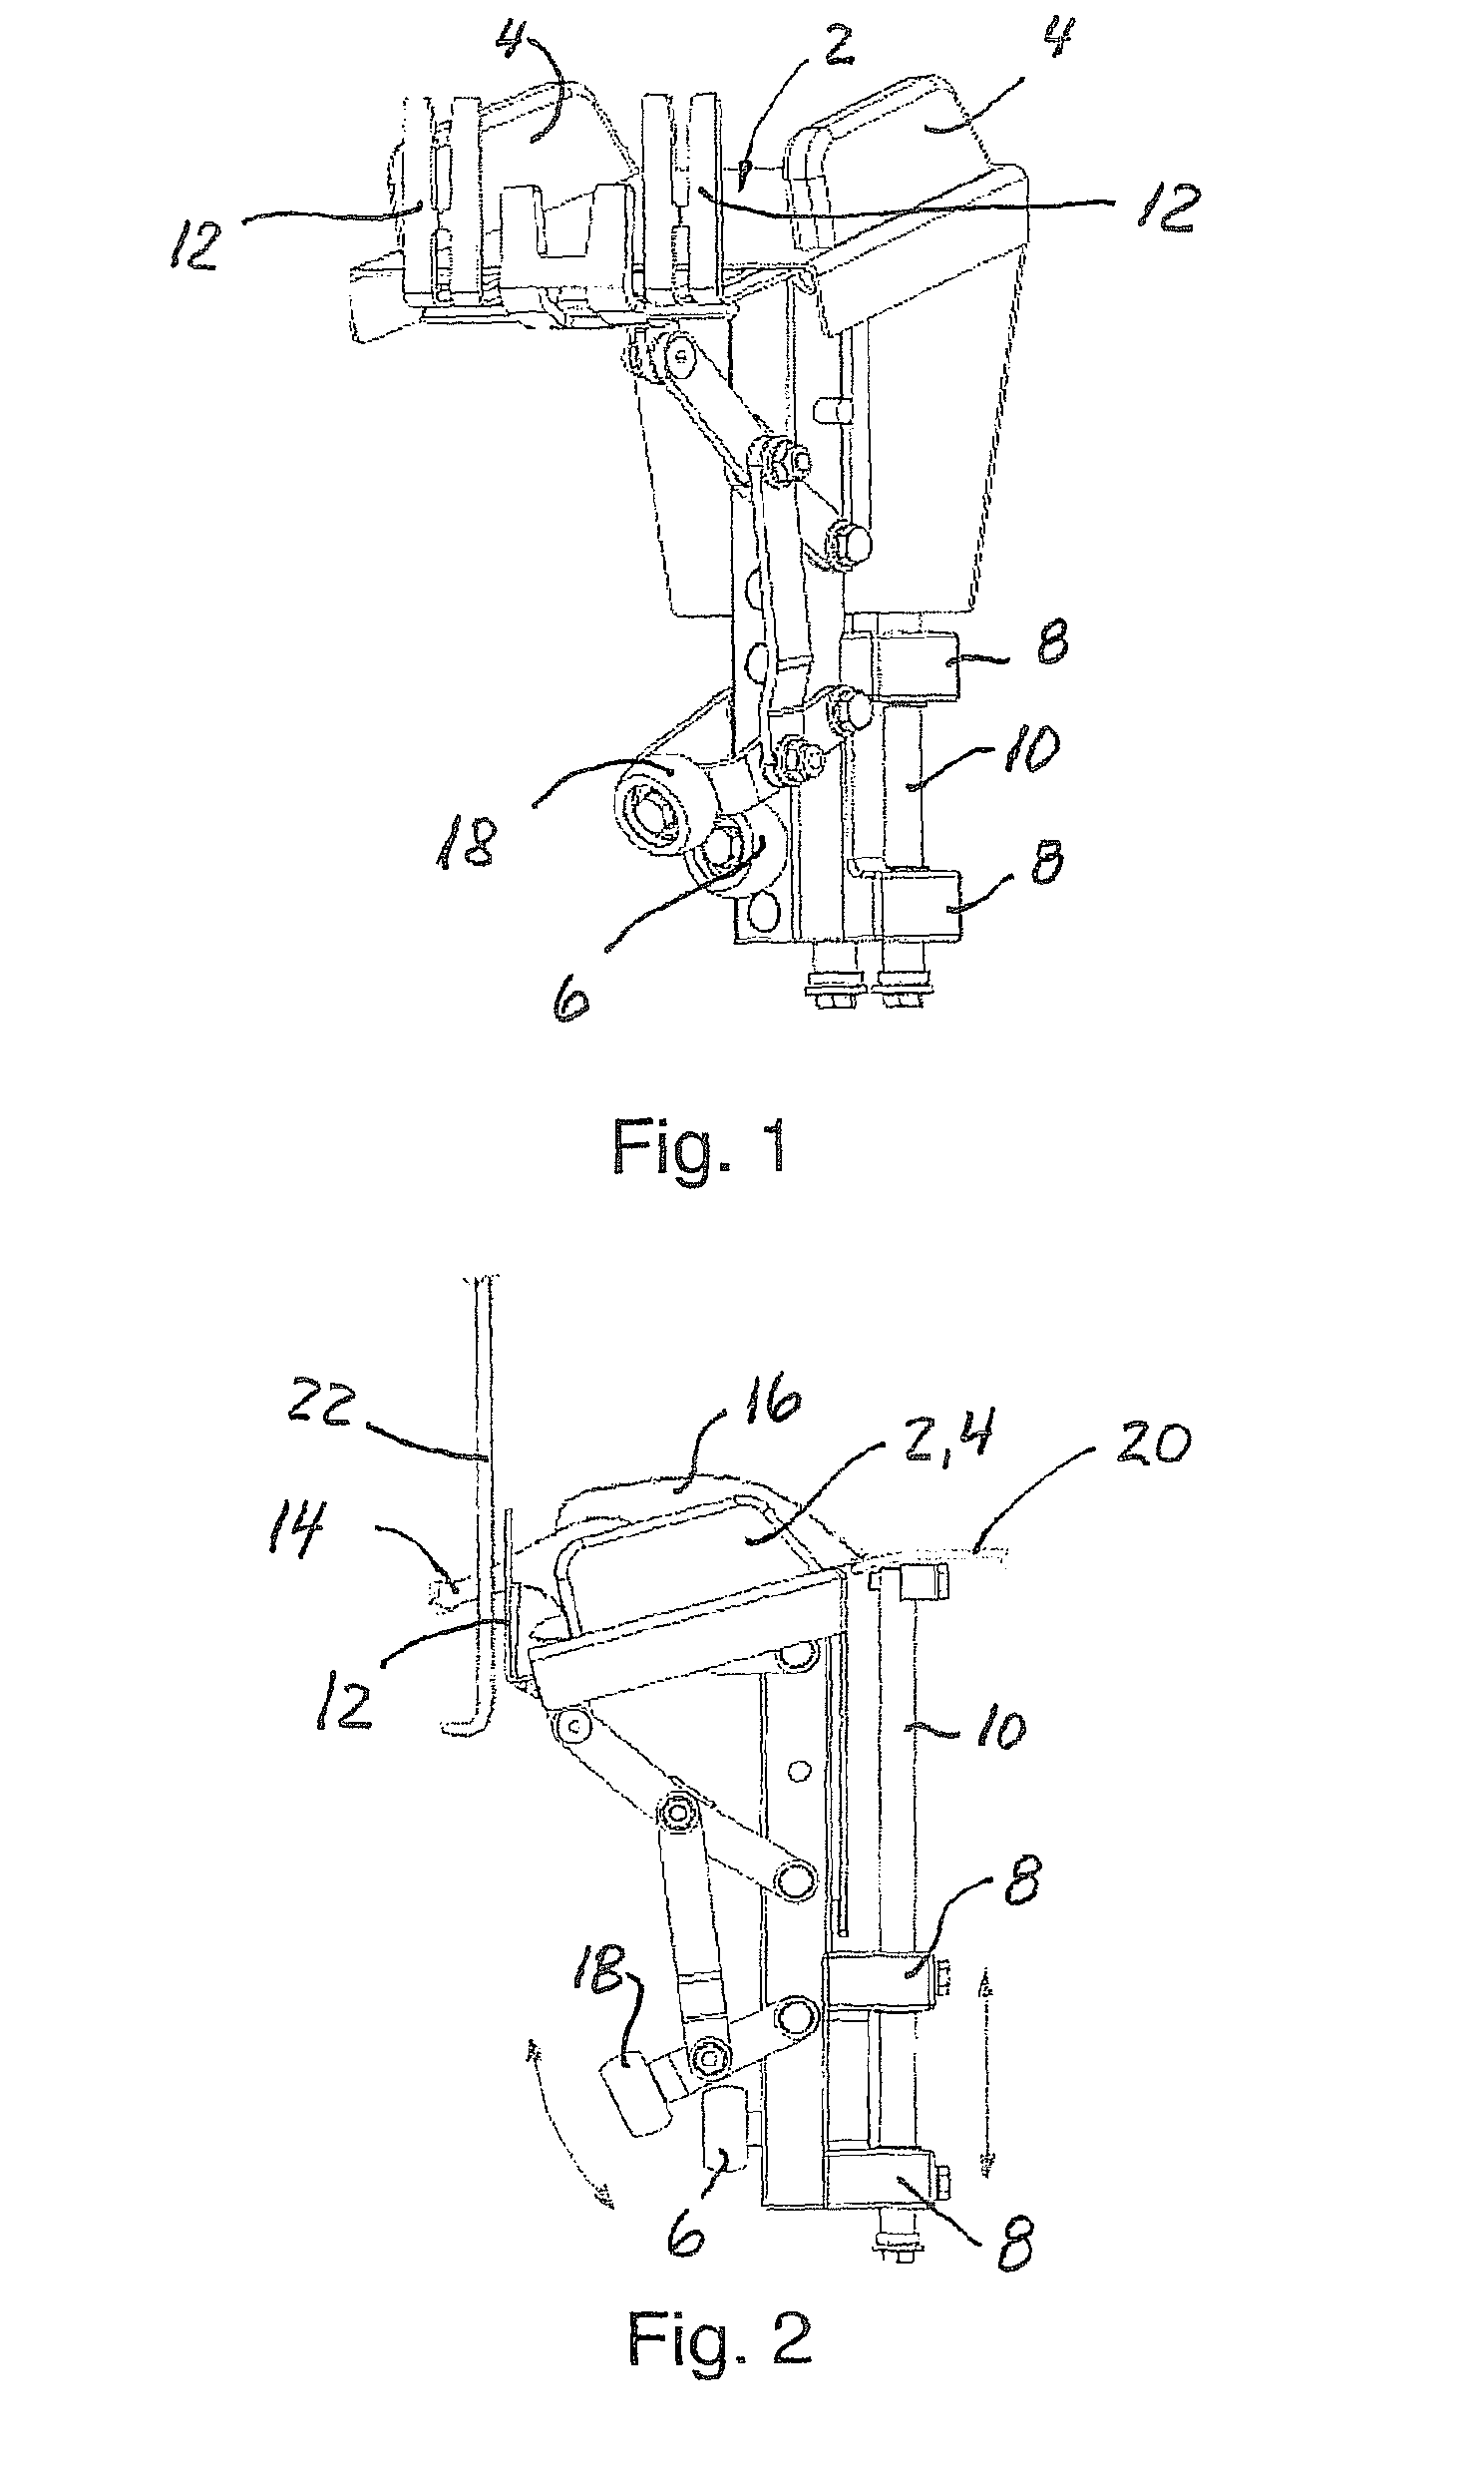 Method and apparatus for suspending poultry to be slaughtered